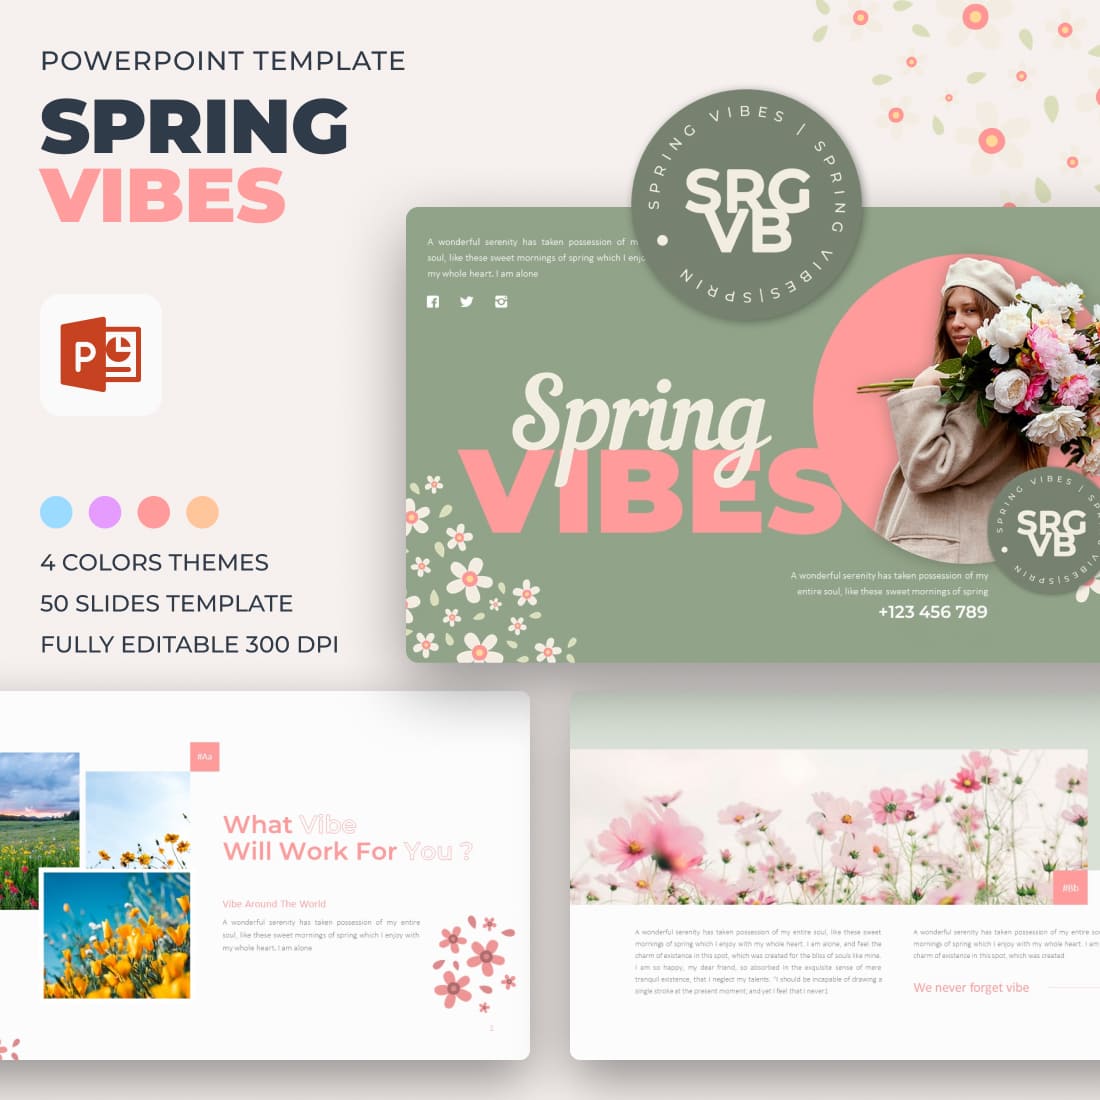 Spring Vibes PowerPoint Template - main image preview.